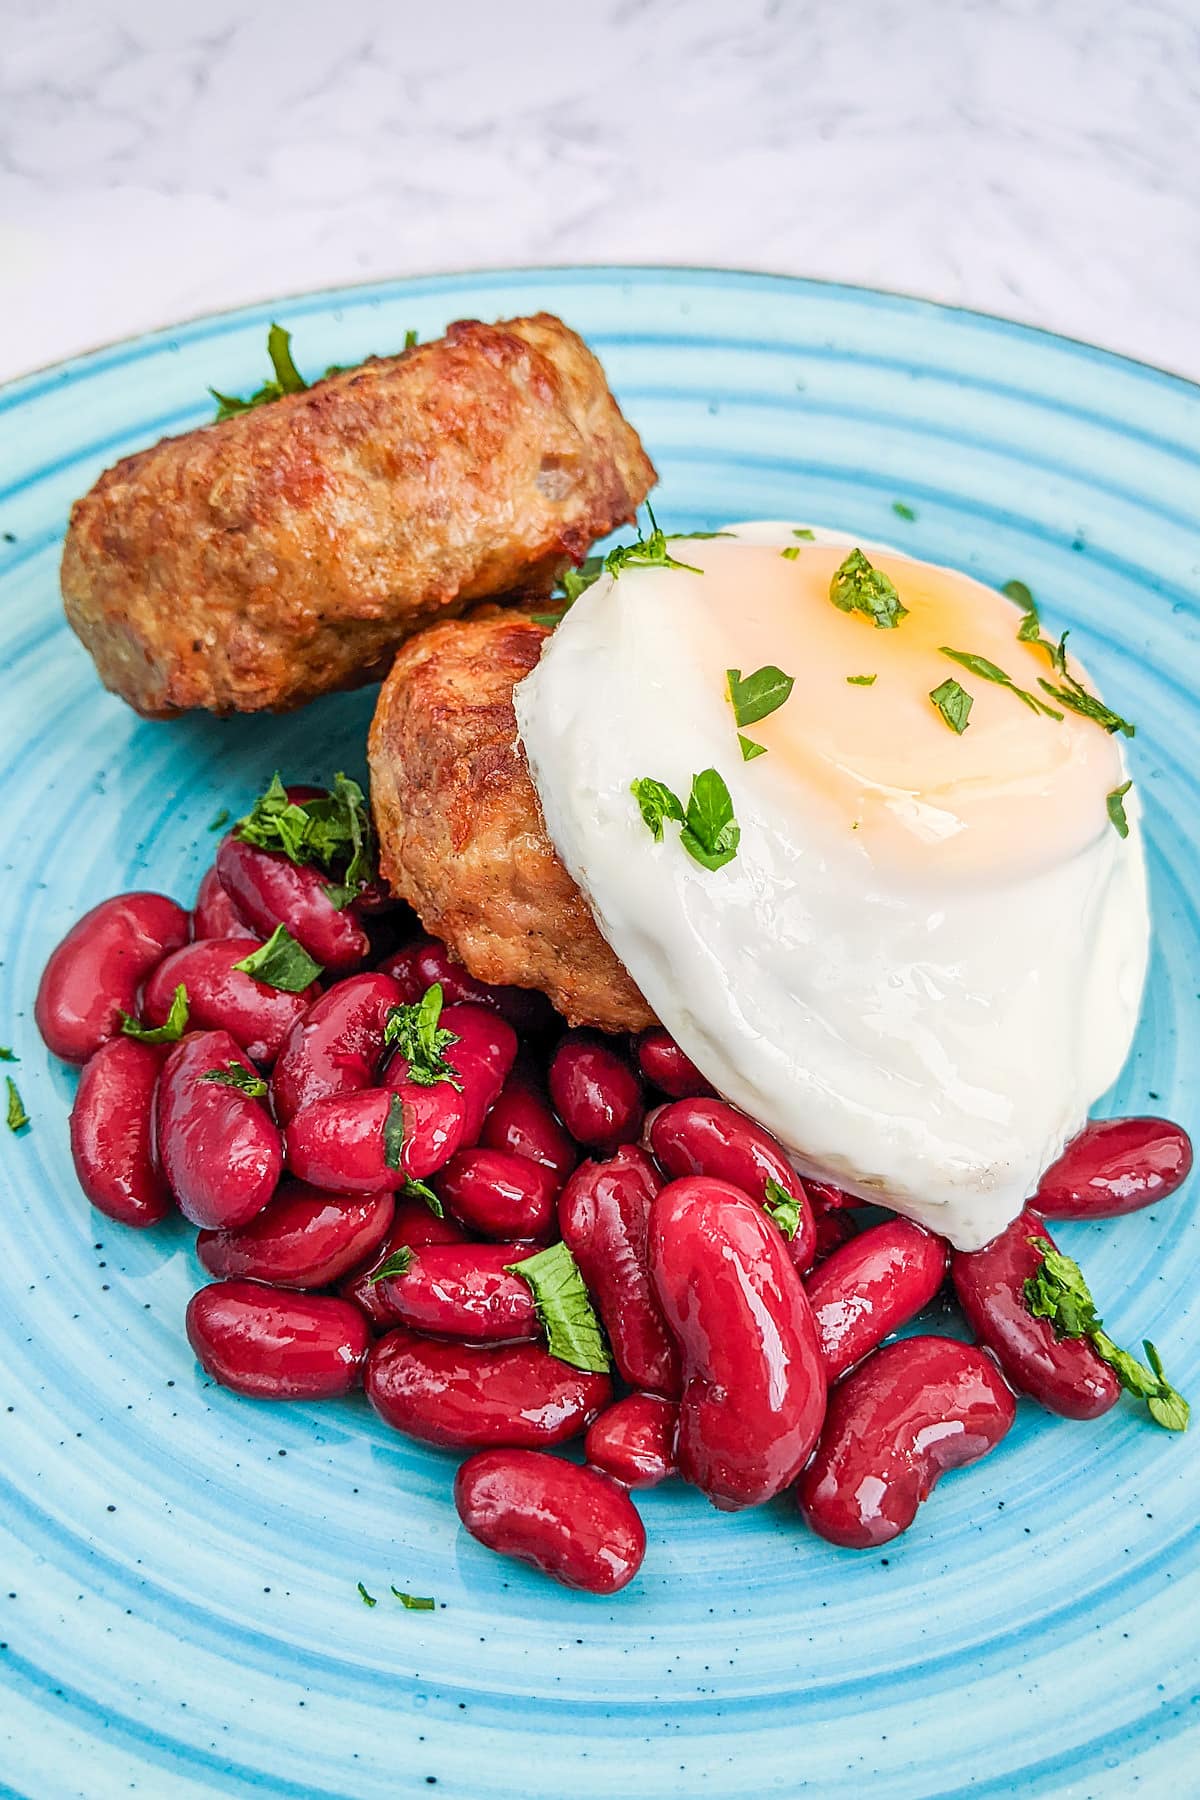 Blue plate with homemade air fryer sausages, canned beans and fried egg.